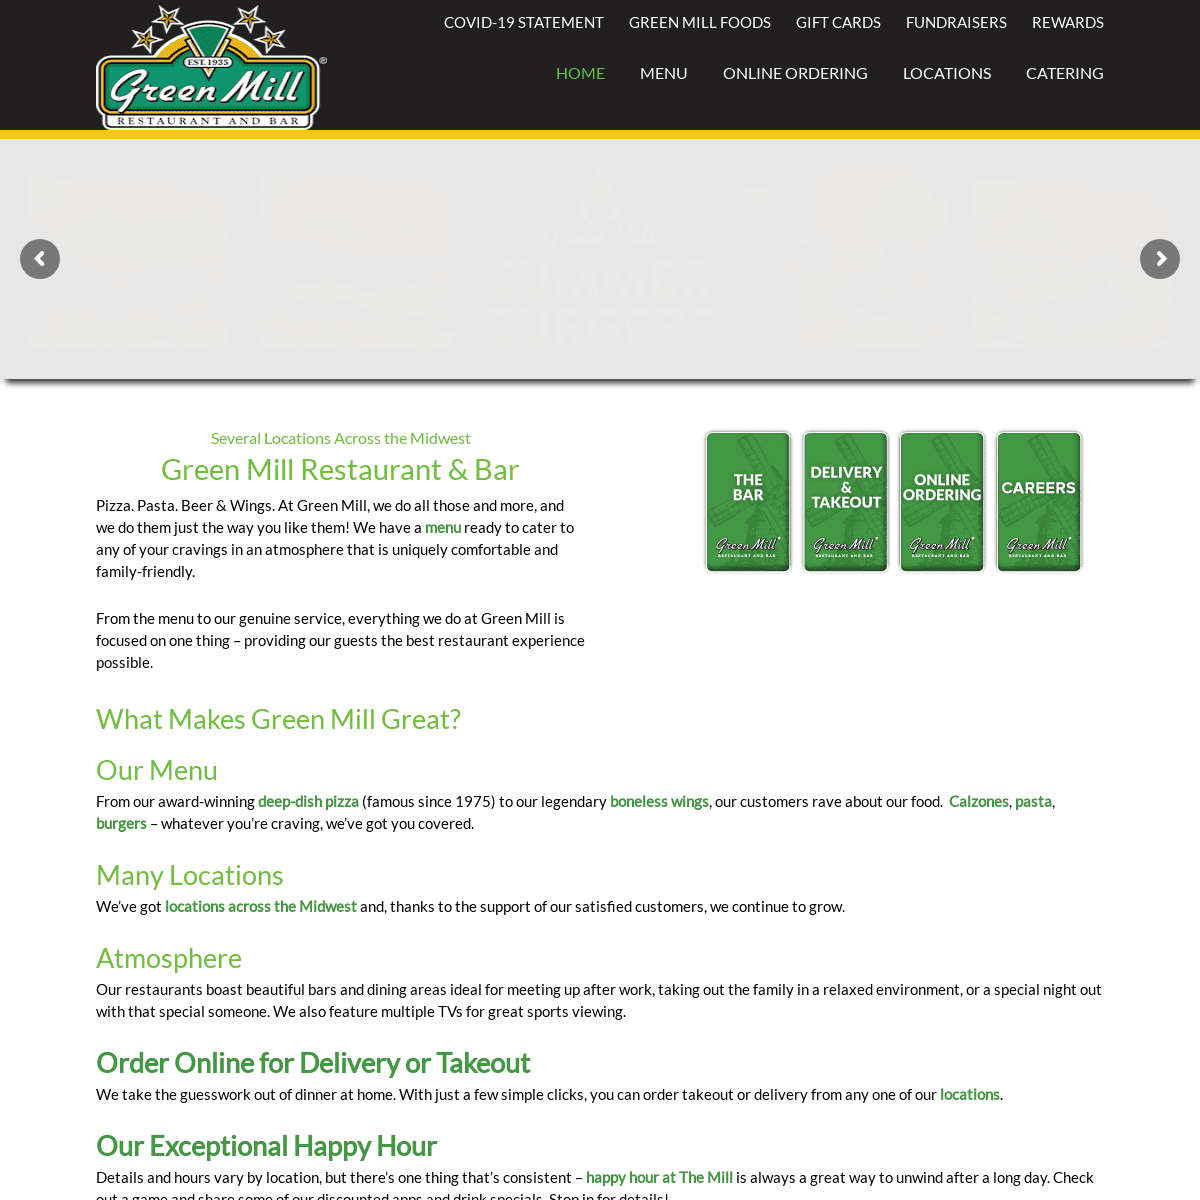 A complete backup of https://greenmill.com